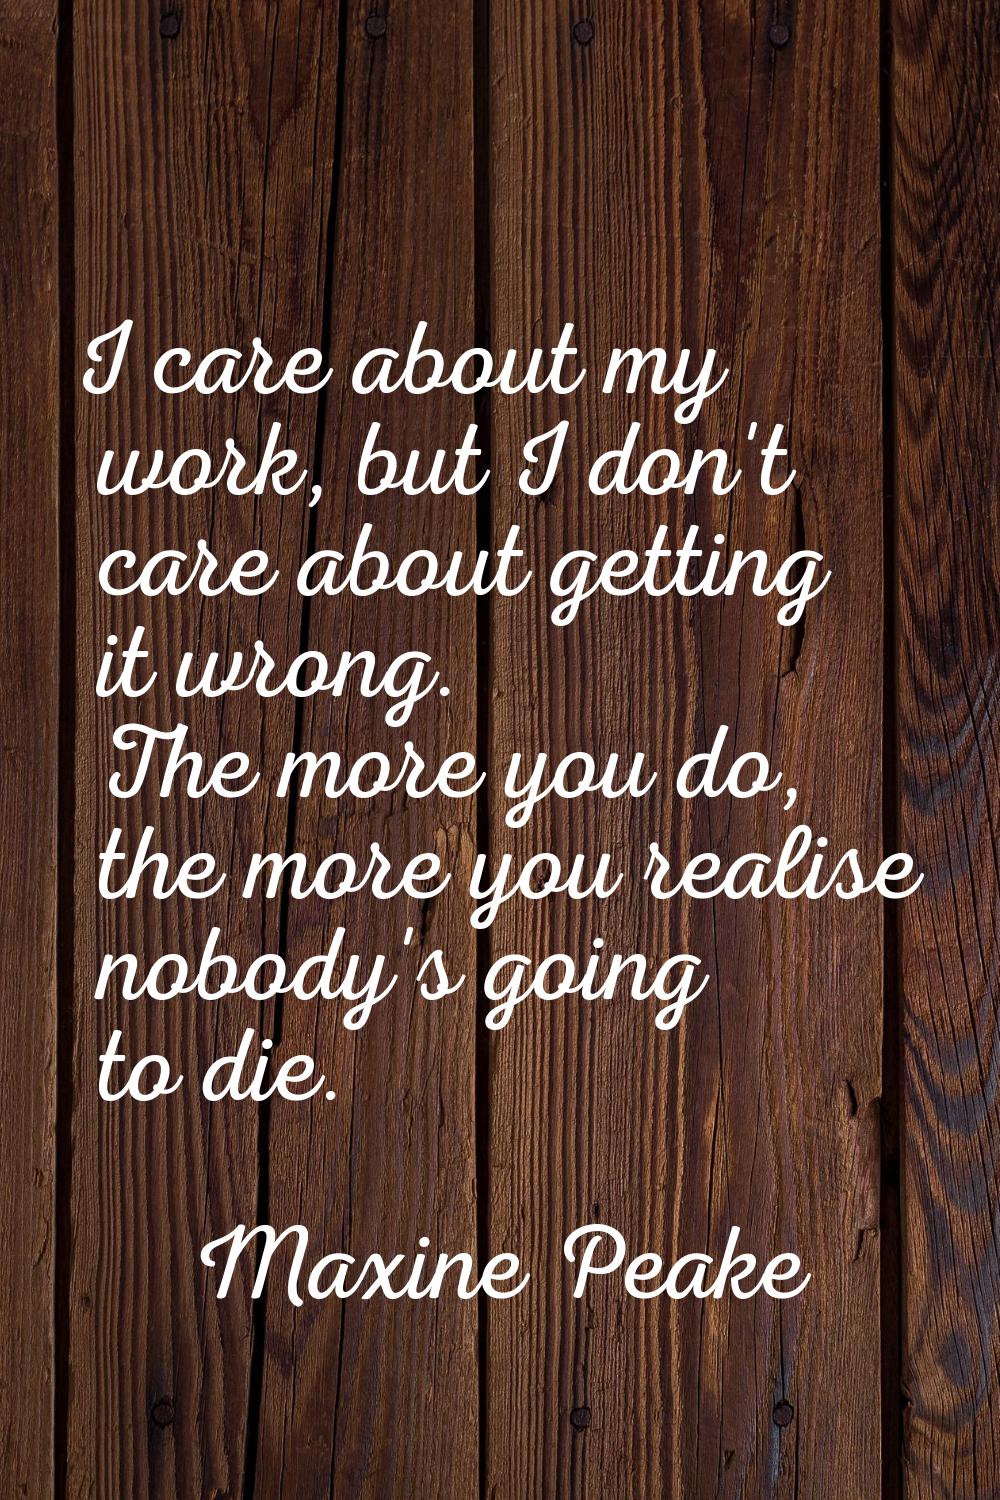 I care about my work, but I don't care about getting it wrong. The more you do, the more you realis